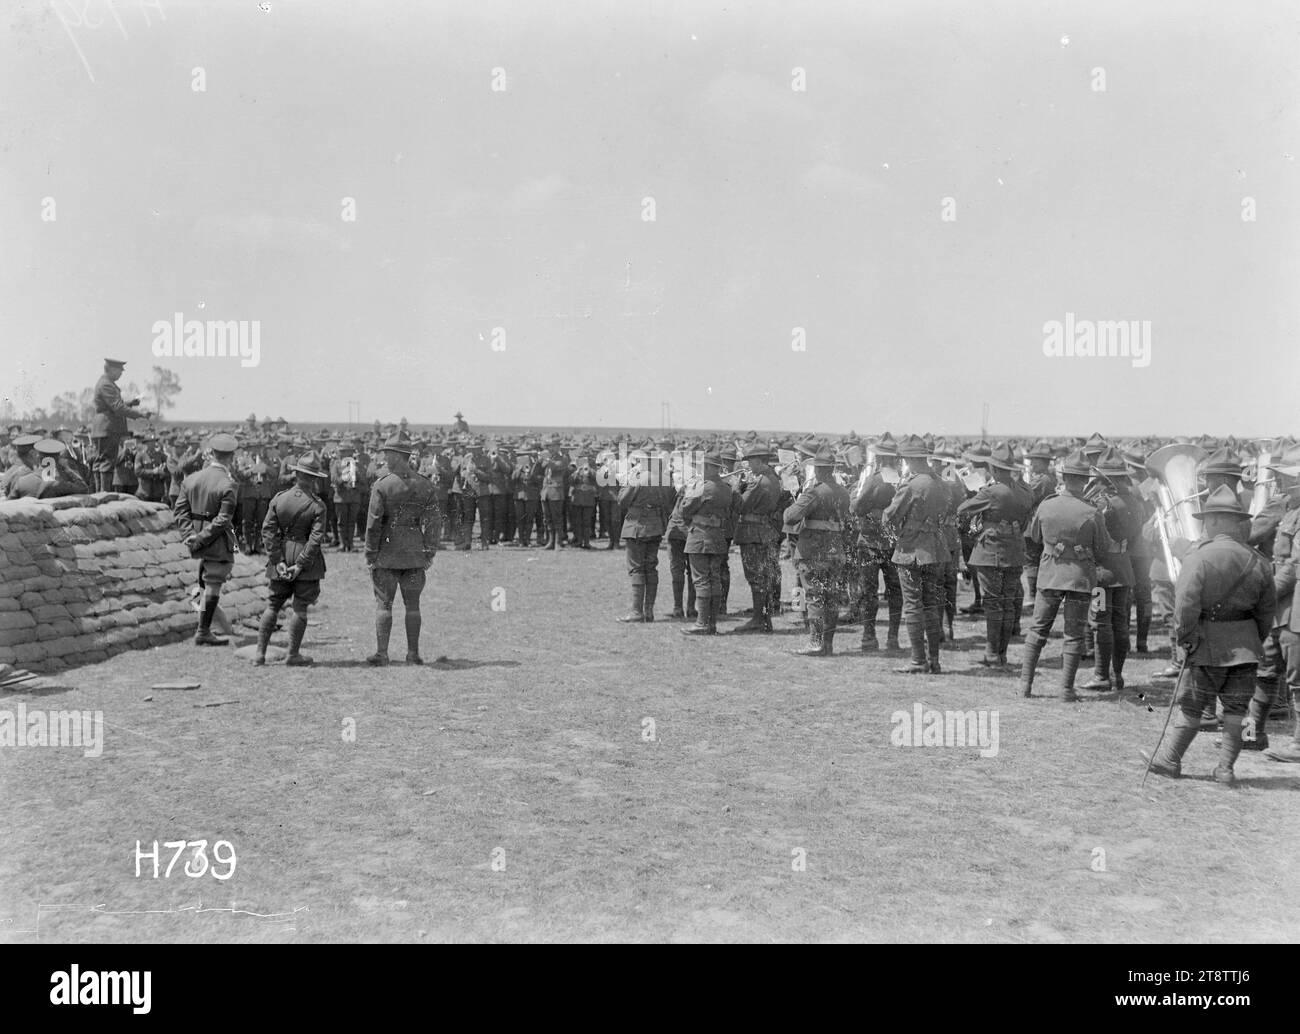 The massed bands playing at the New Zealand Divisional Band Contest, France, A general view looking towards the massed military bands playing at the New Zealand Divisional Band Contest under the conductorship of the judge who stands on a wall of sandbags, far left. A Canterbury Regiment won the contest. Photograph taken Authie 27 July 1918 Stock Photo